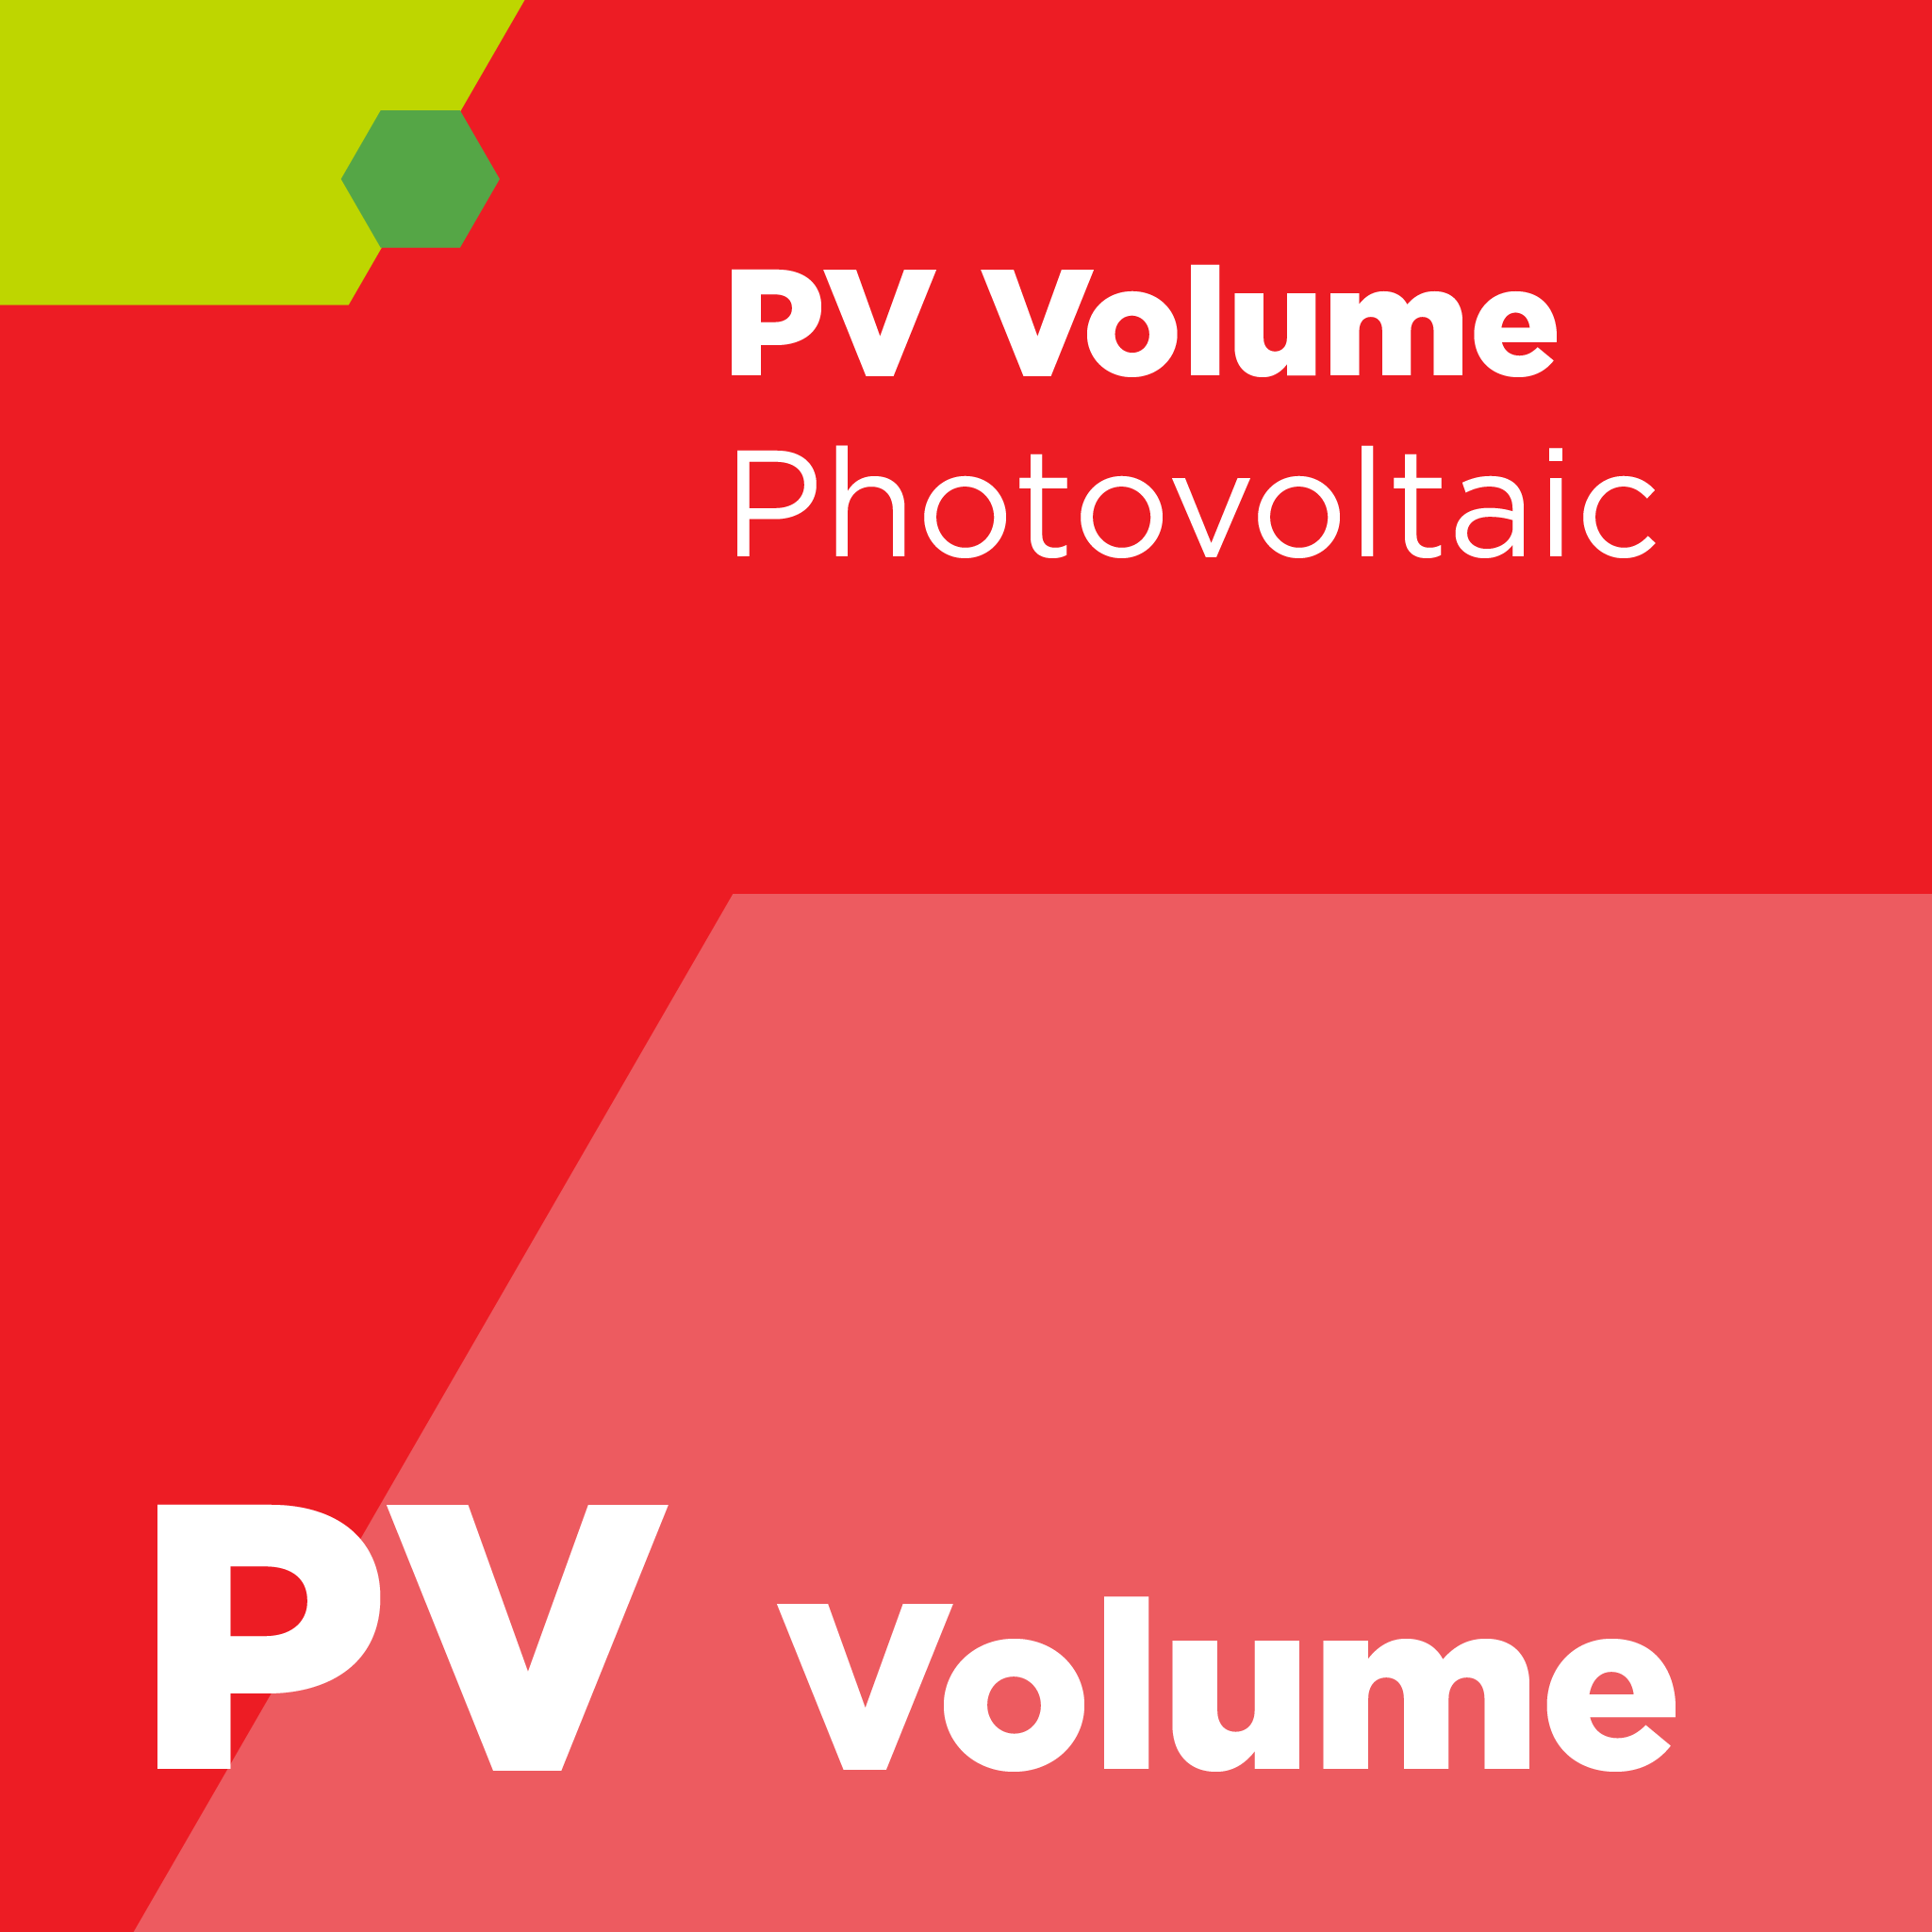 PV00700 - SEMI PV7 - Guide for Hydrogen (H2), Bulk, Used in Photovoltaic Applications